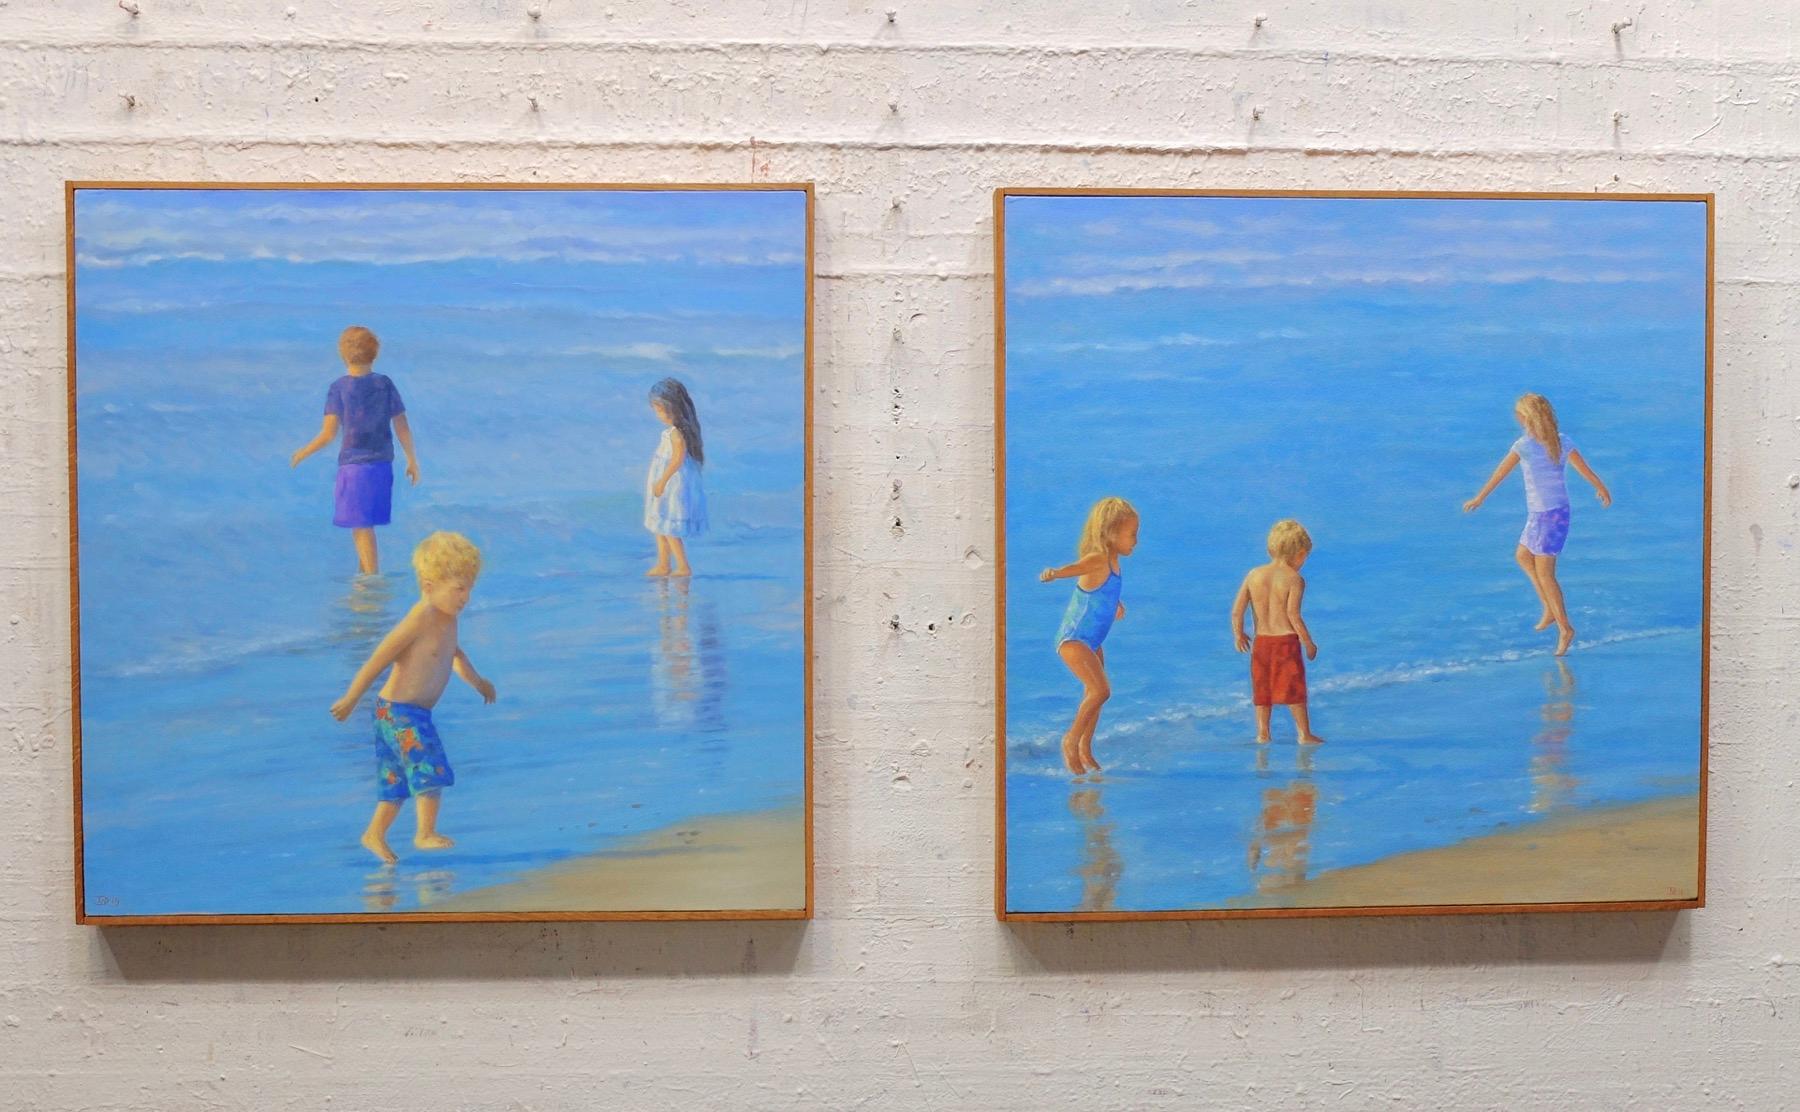 TEAM No. 1 & II / two 30 x 30 inch paintings - children beach play (diptych)